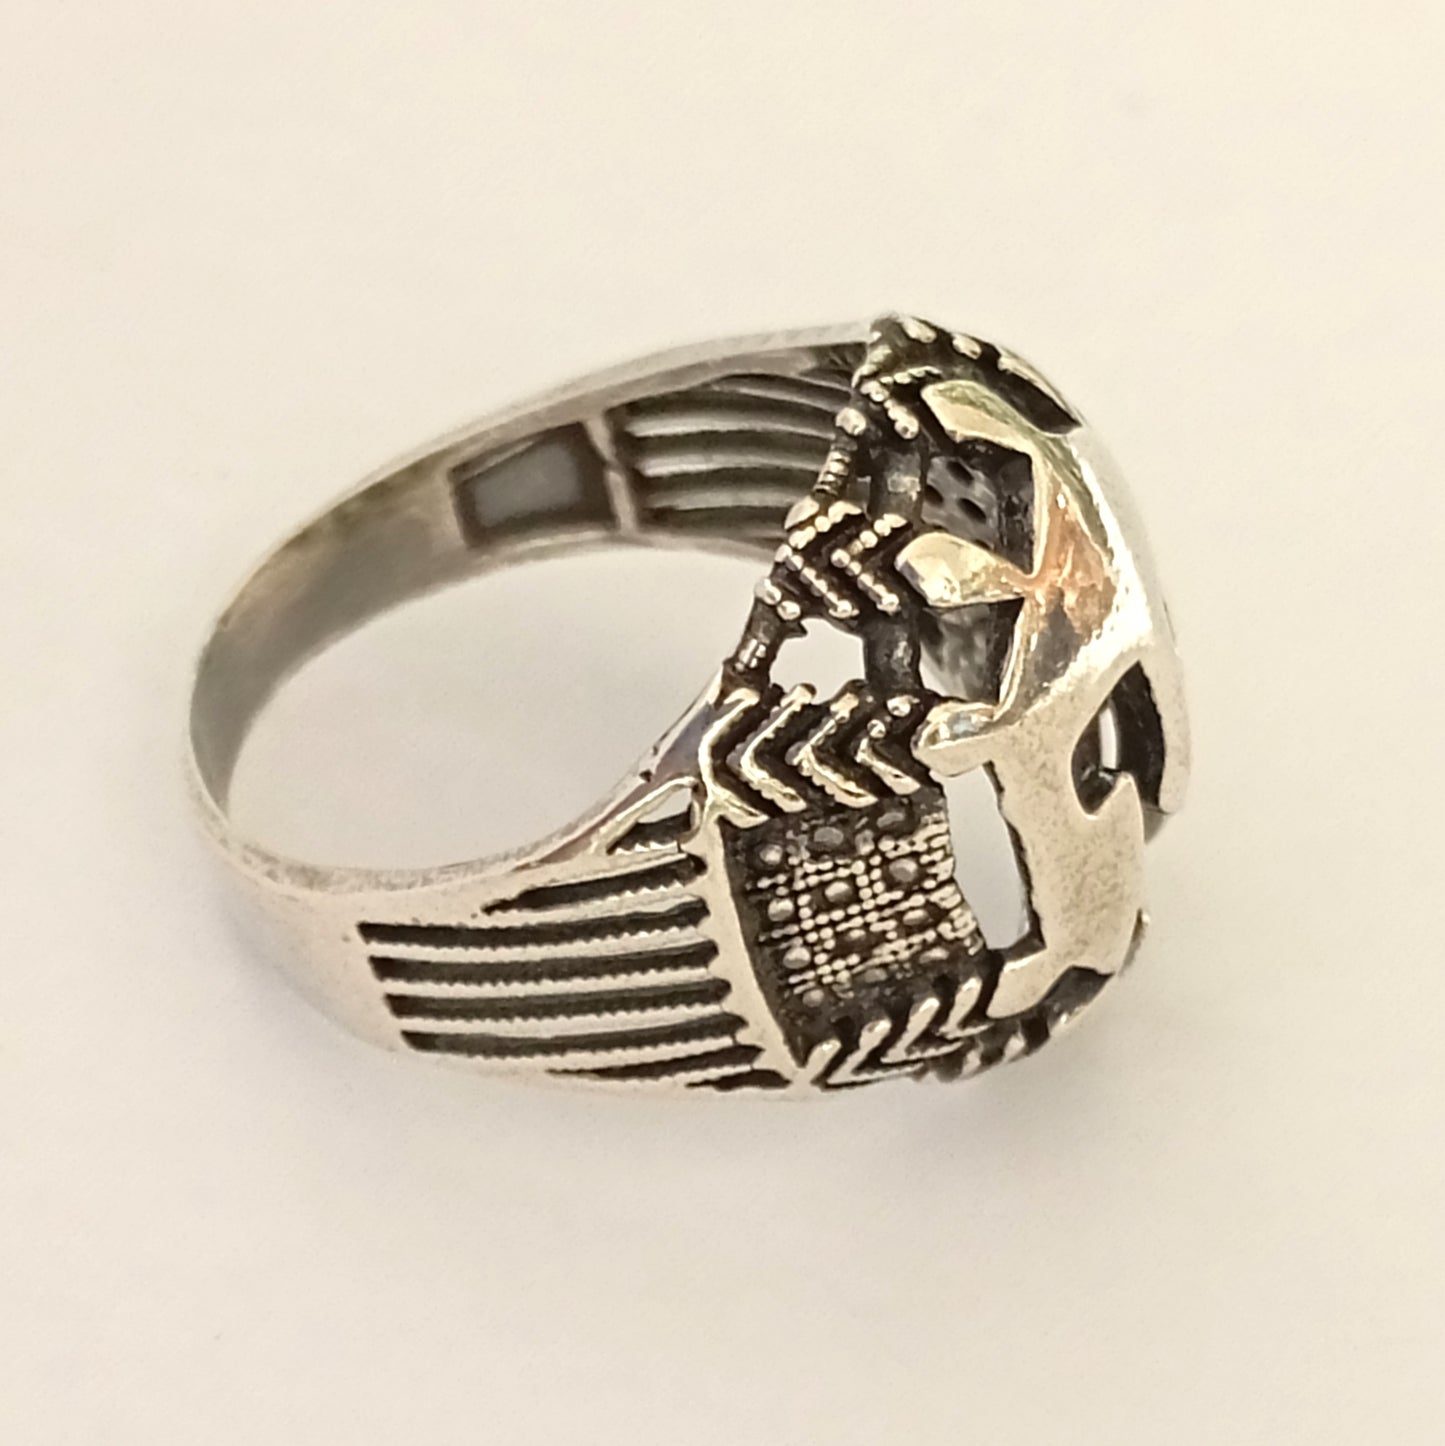 Spartan Helmet - King Leonidas - 300 Spartans - Battle of Thermopylae - 480 BC - Ring - Size EU 61 - Size US 9 1/2 - 925 Sterling Silver